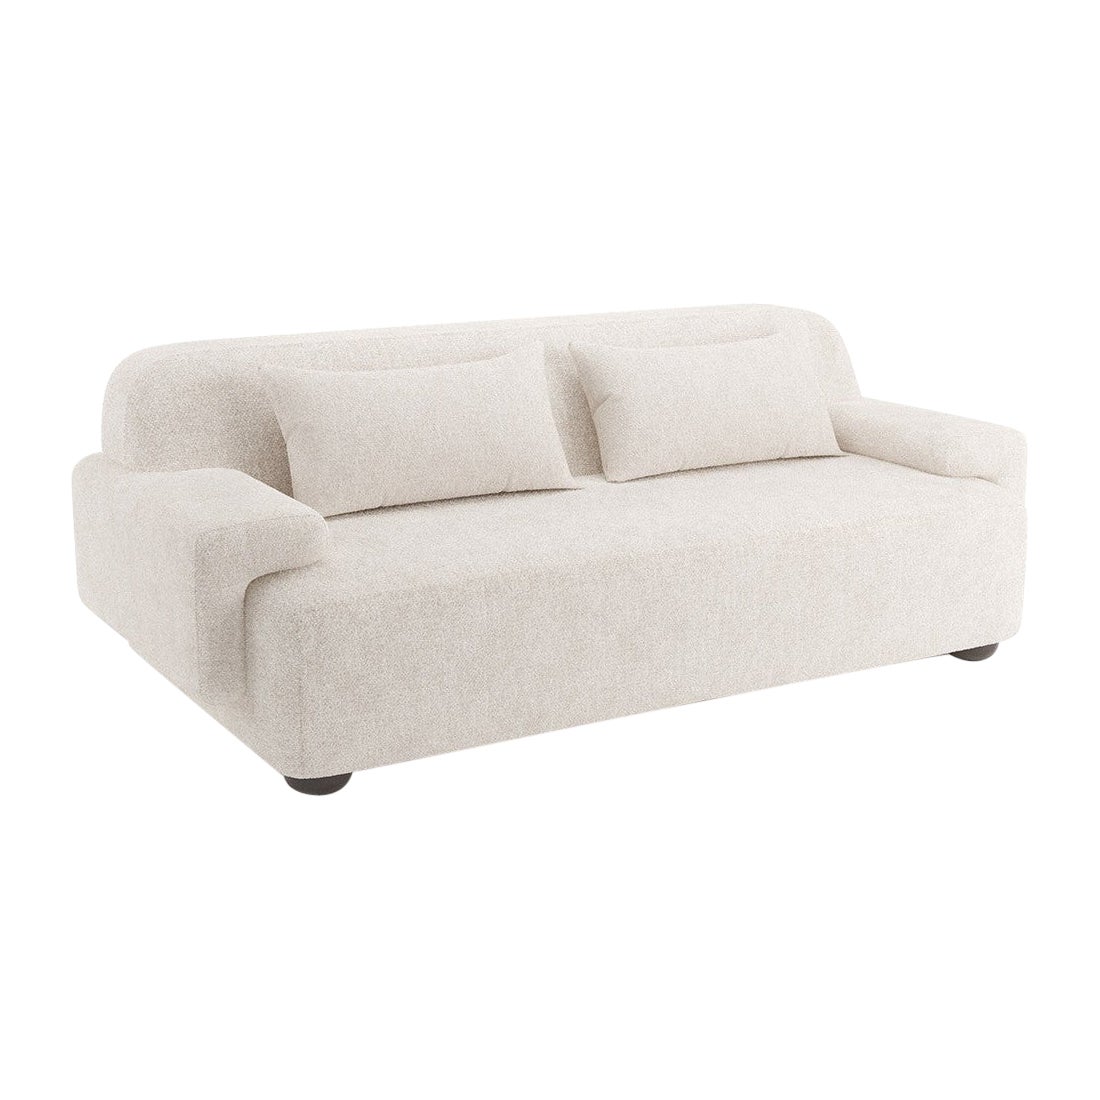 Popus Editions Lena 2.5 Seater Sofa in Gray Antwerp Linen Upholstery